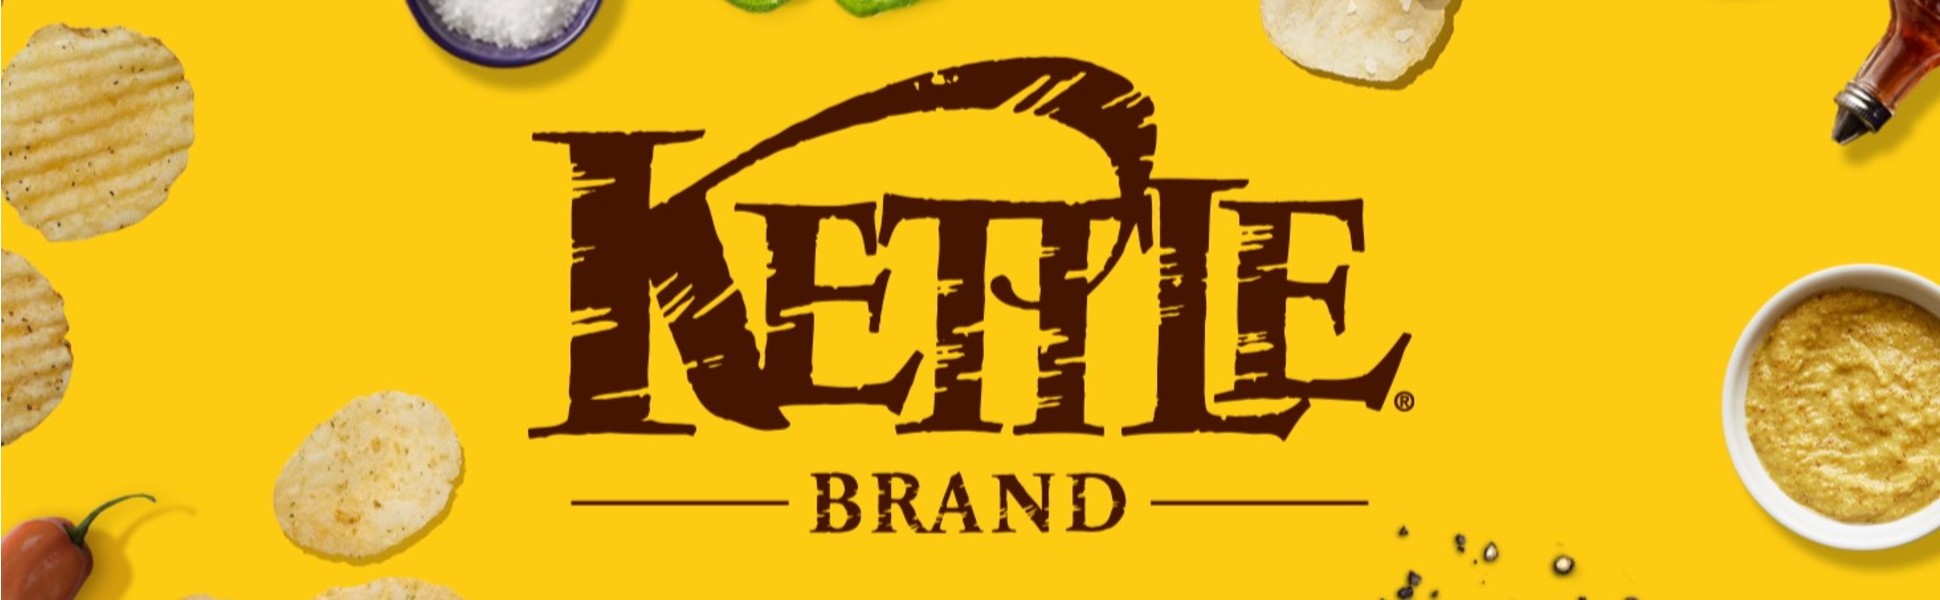 Unsalted - Kettle Brand